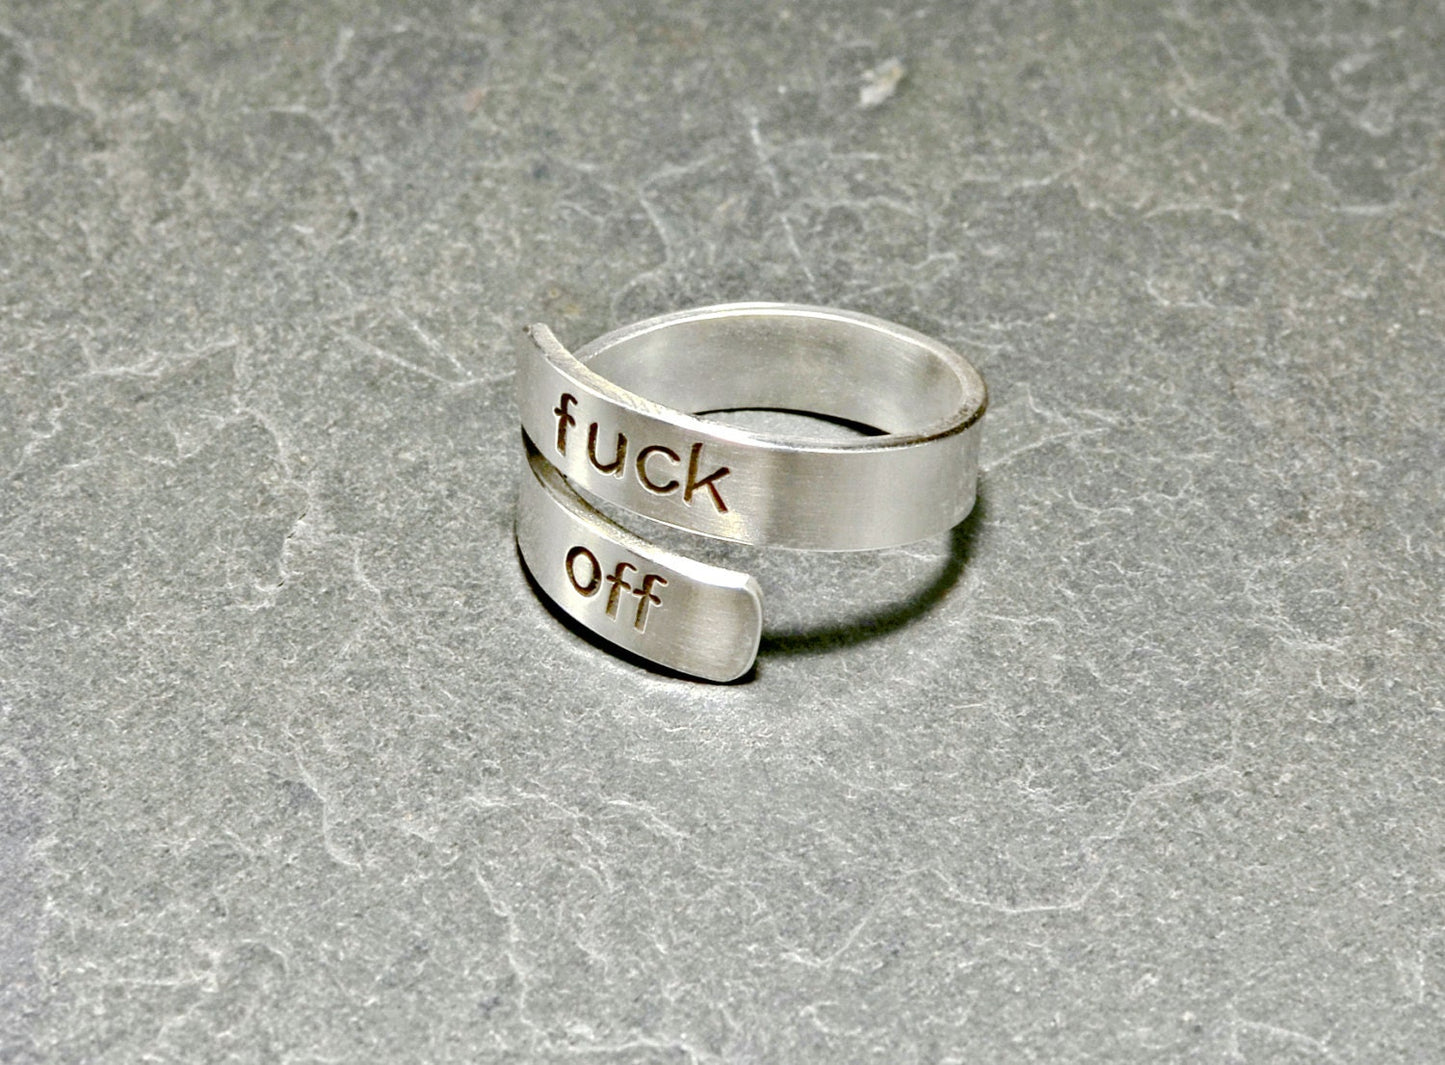 Fu'k off sterling bypass ring